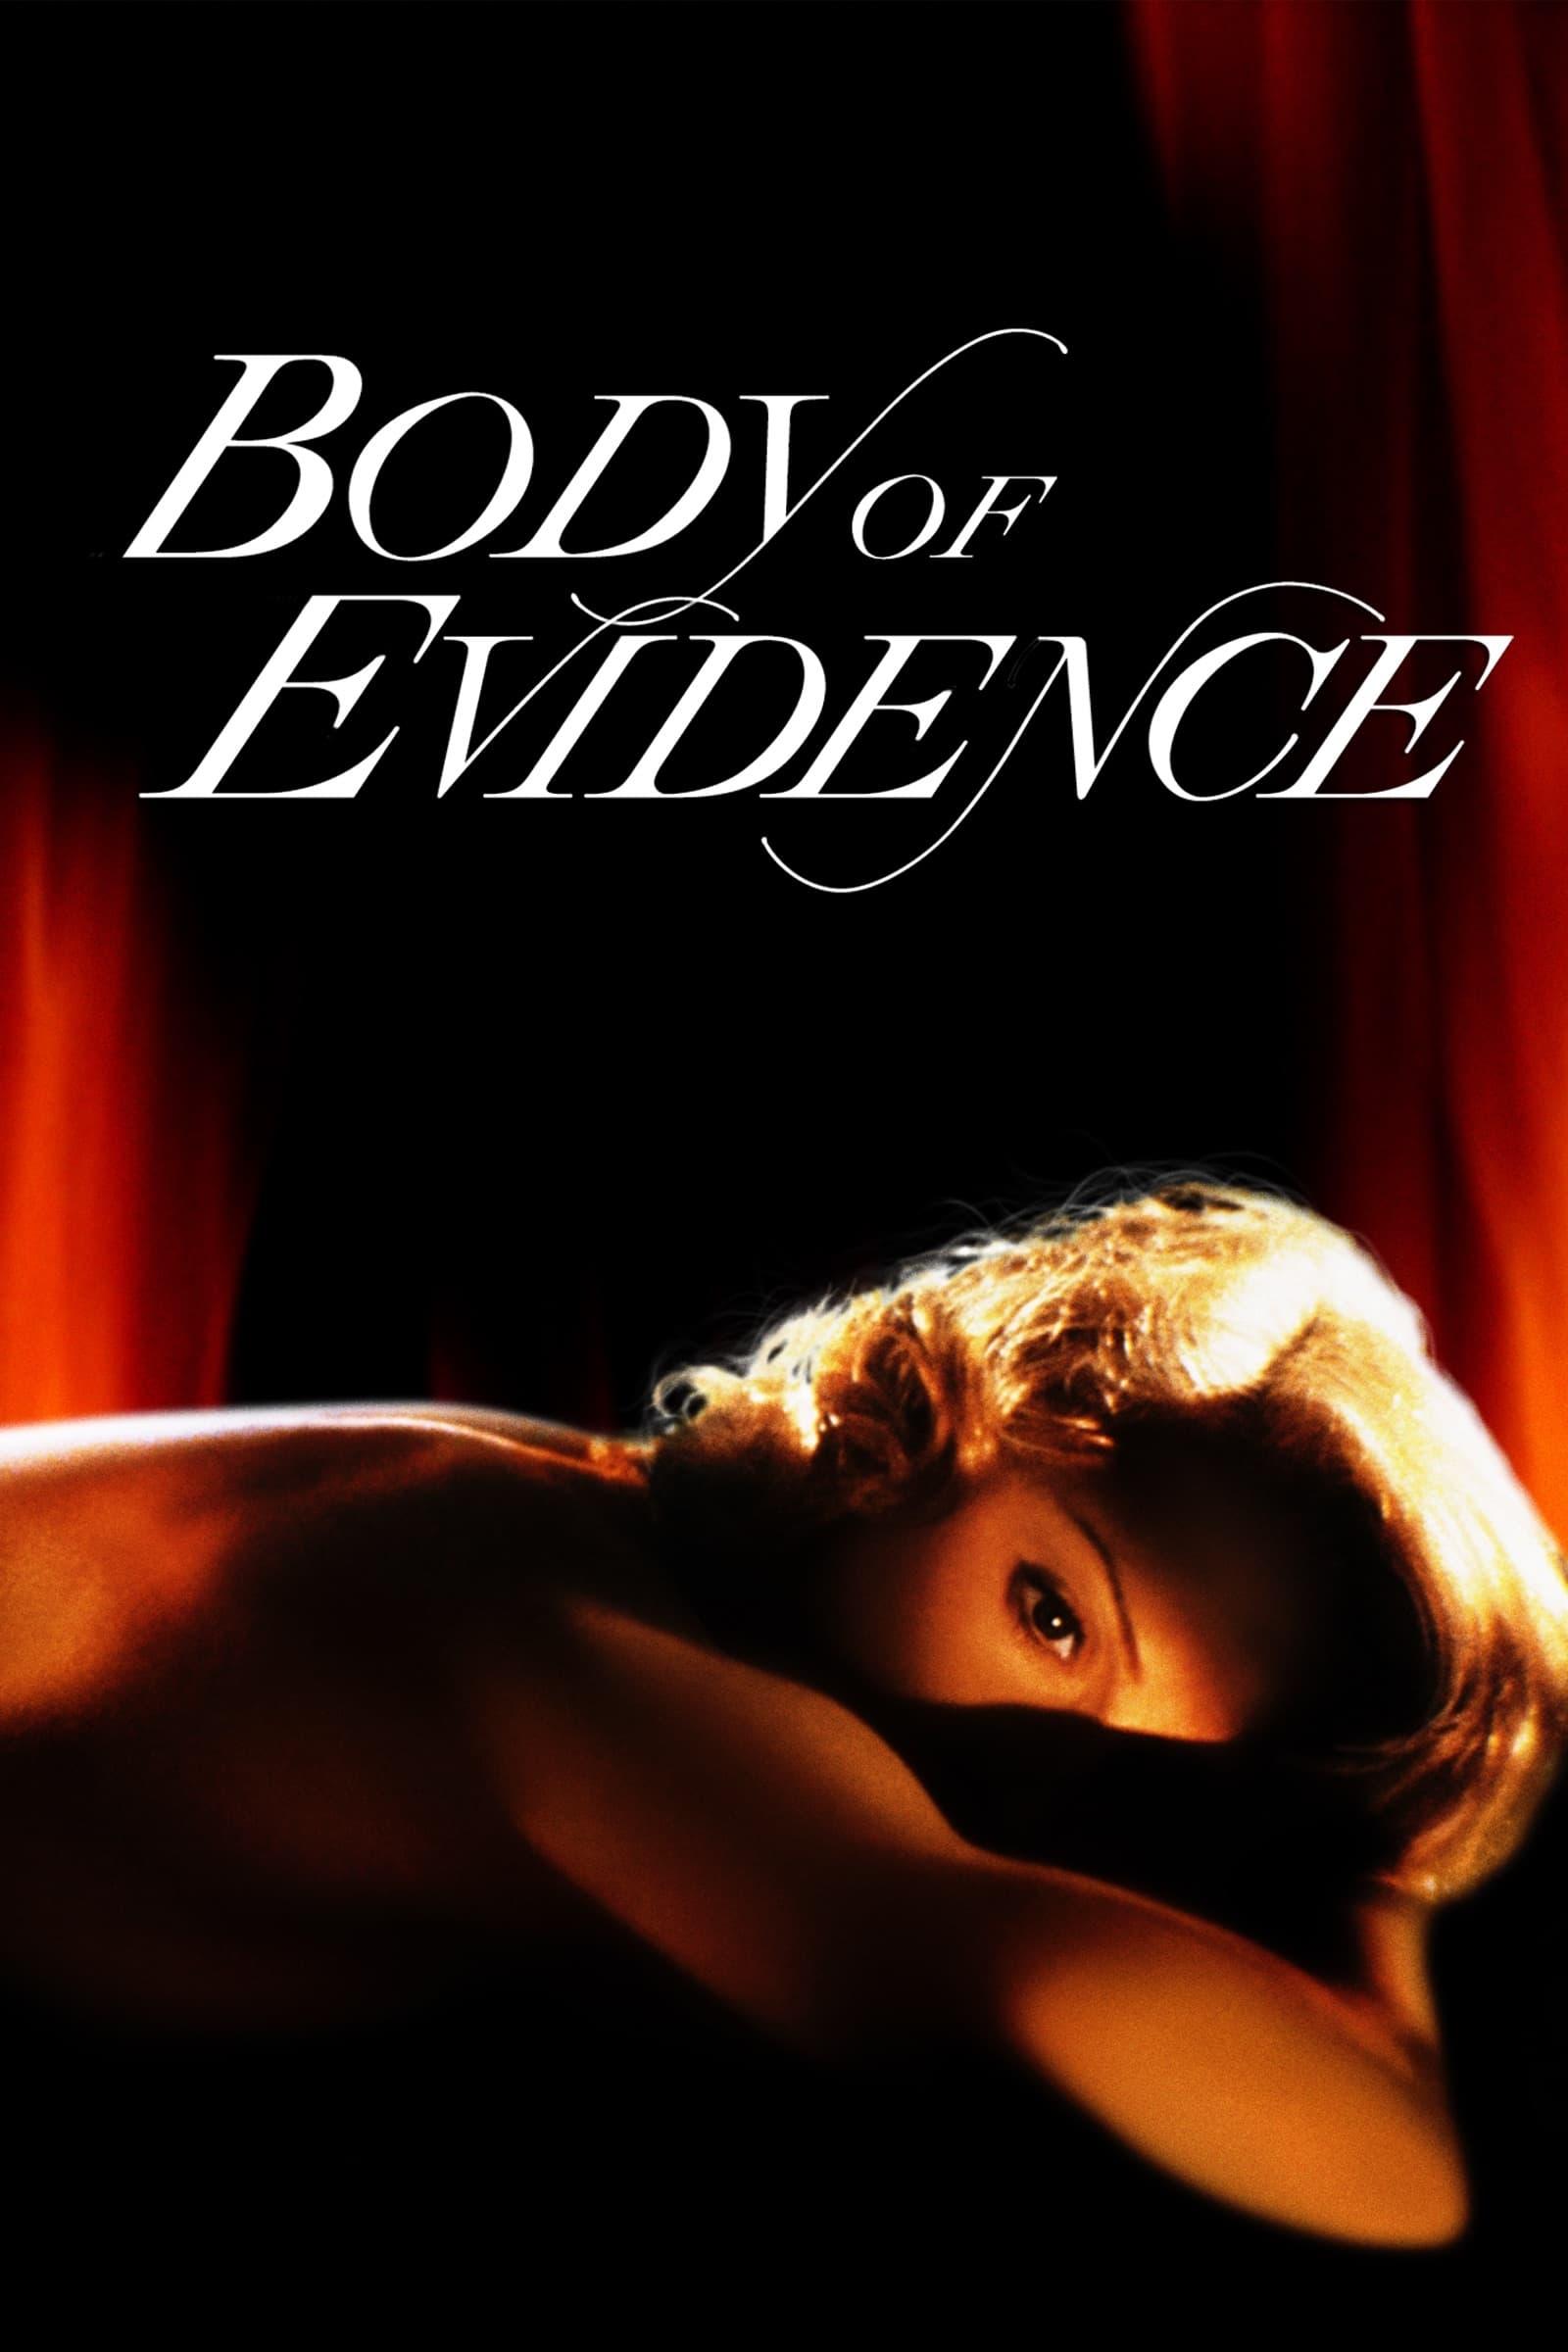 Body of Evidence poster